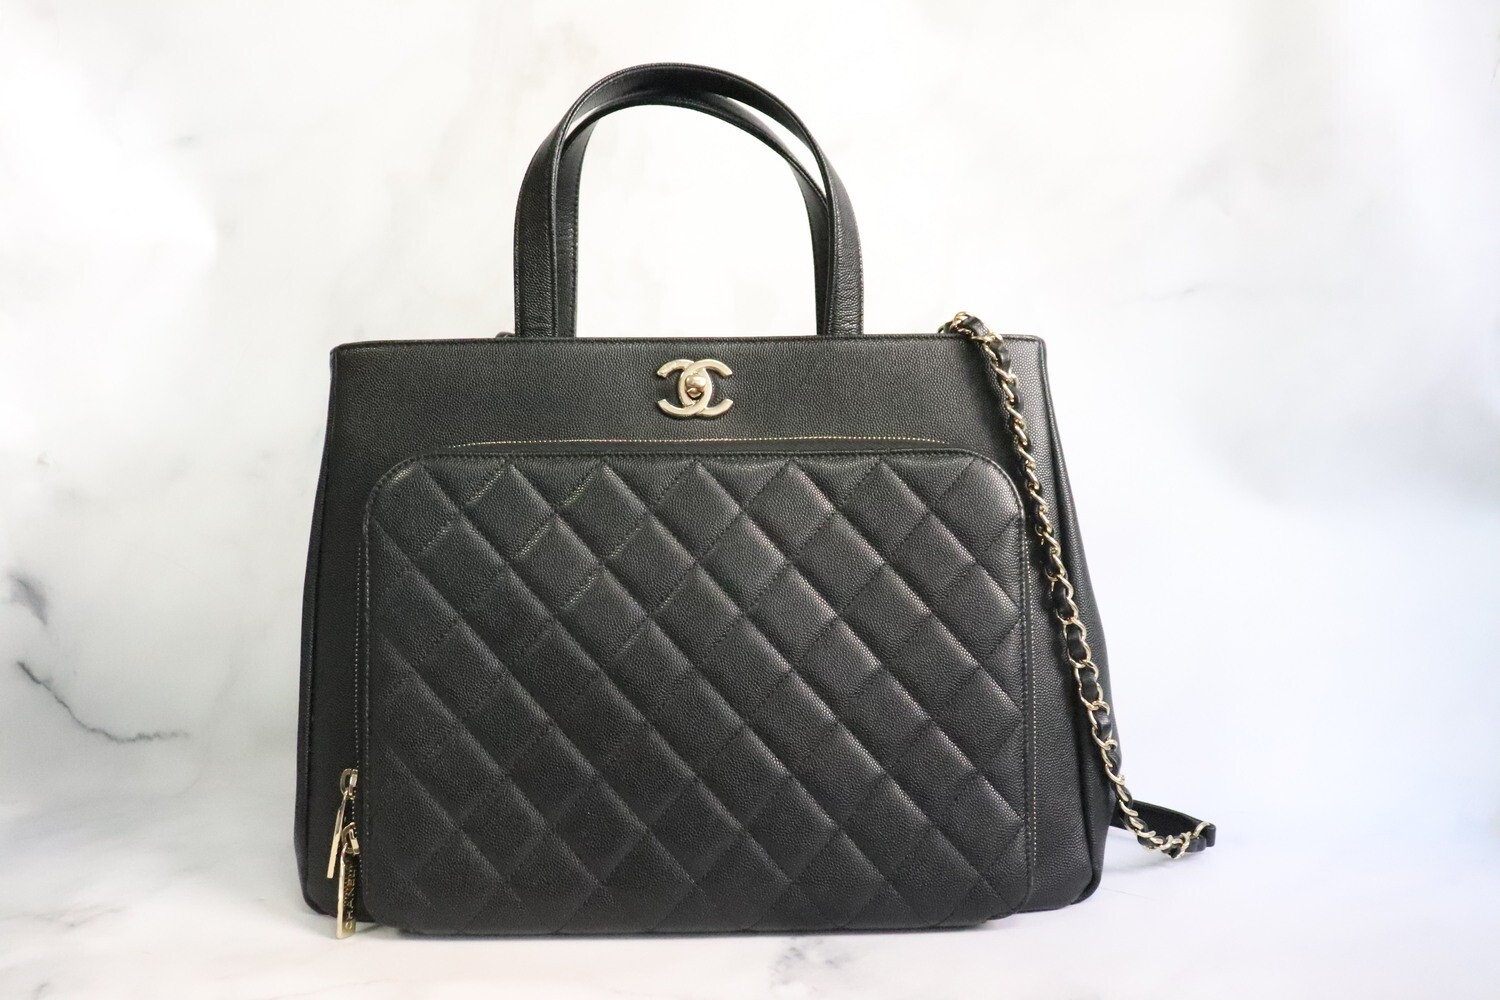 Chanel - Authenticated Business Affinity Handbag - Leather Black for Women, Never Worn